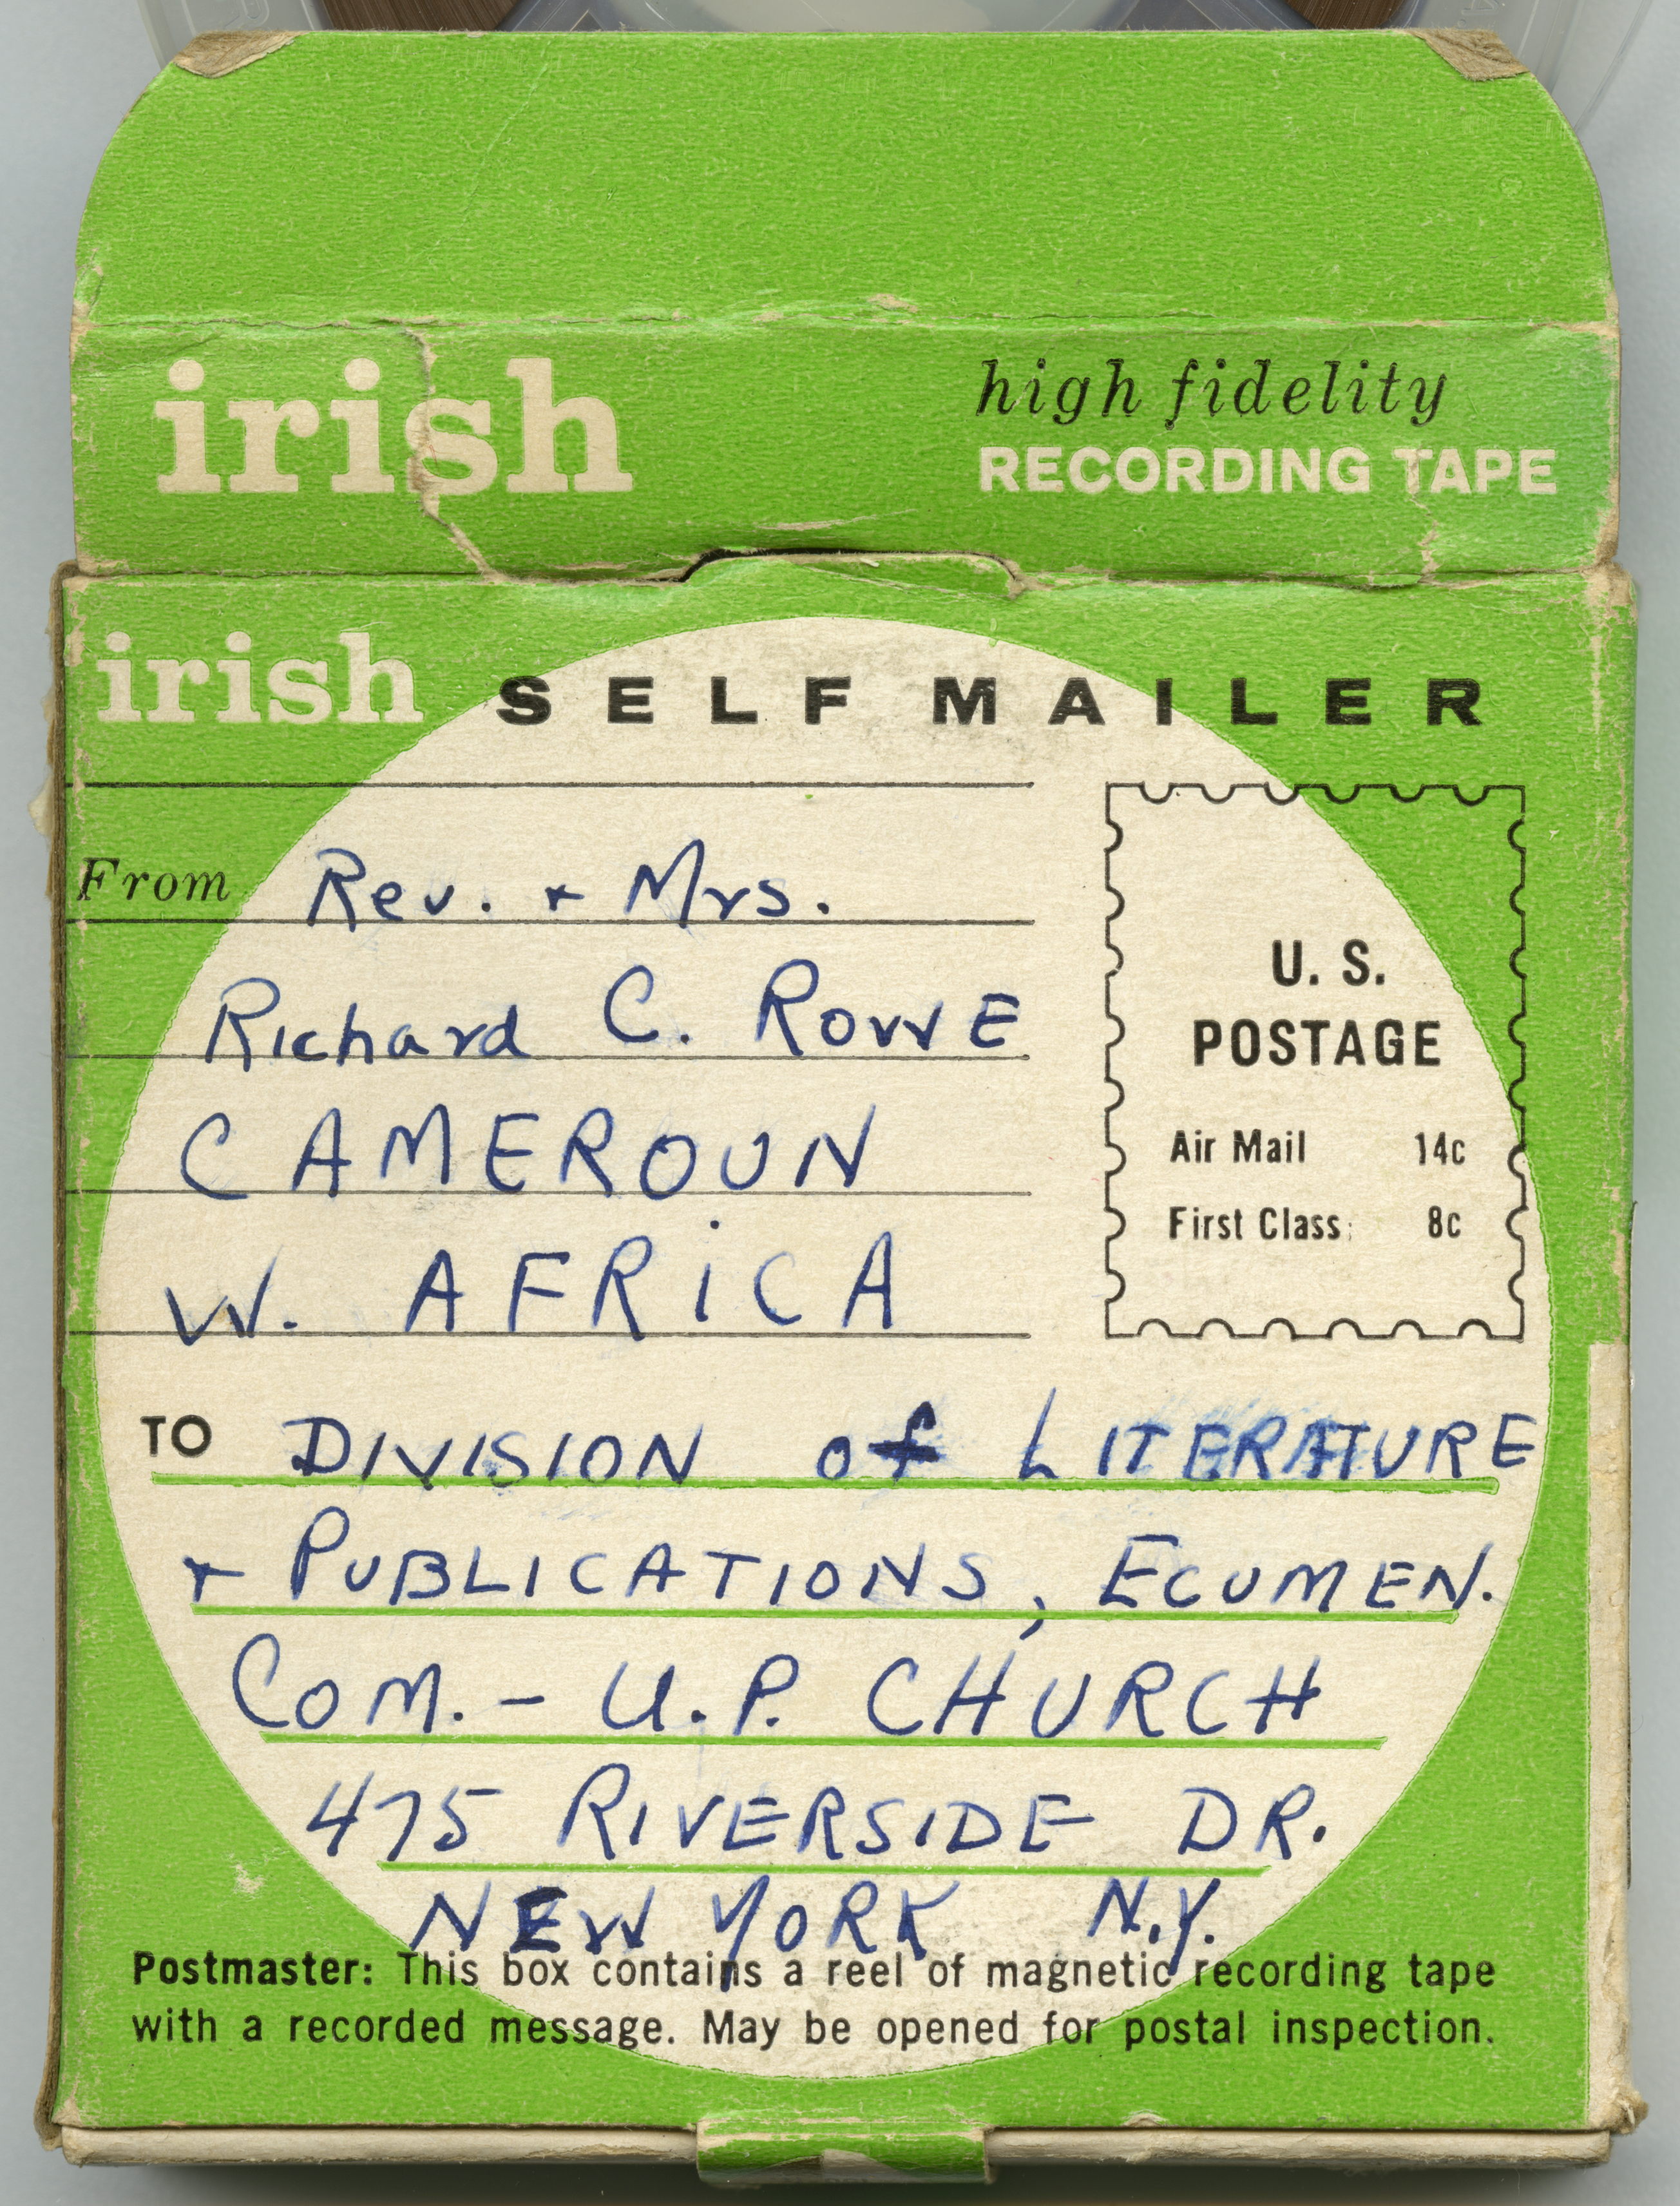 Richard C. and Anna Mae Rowe report from Cameroon, 1960, side 1.